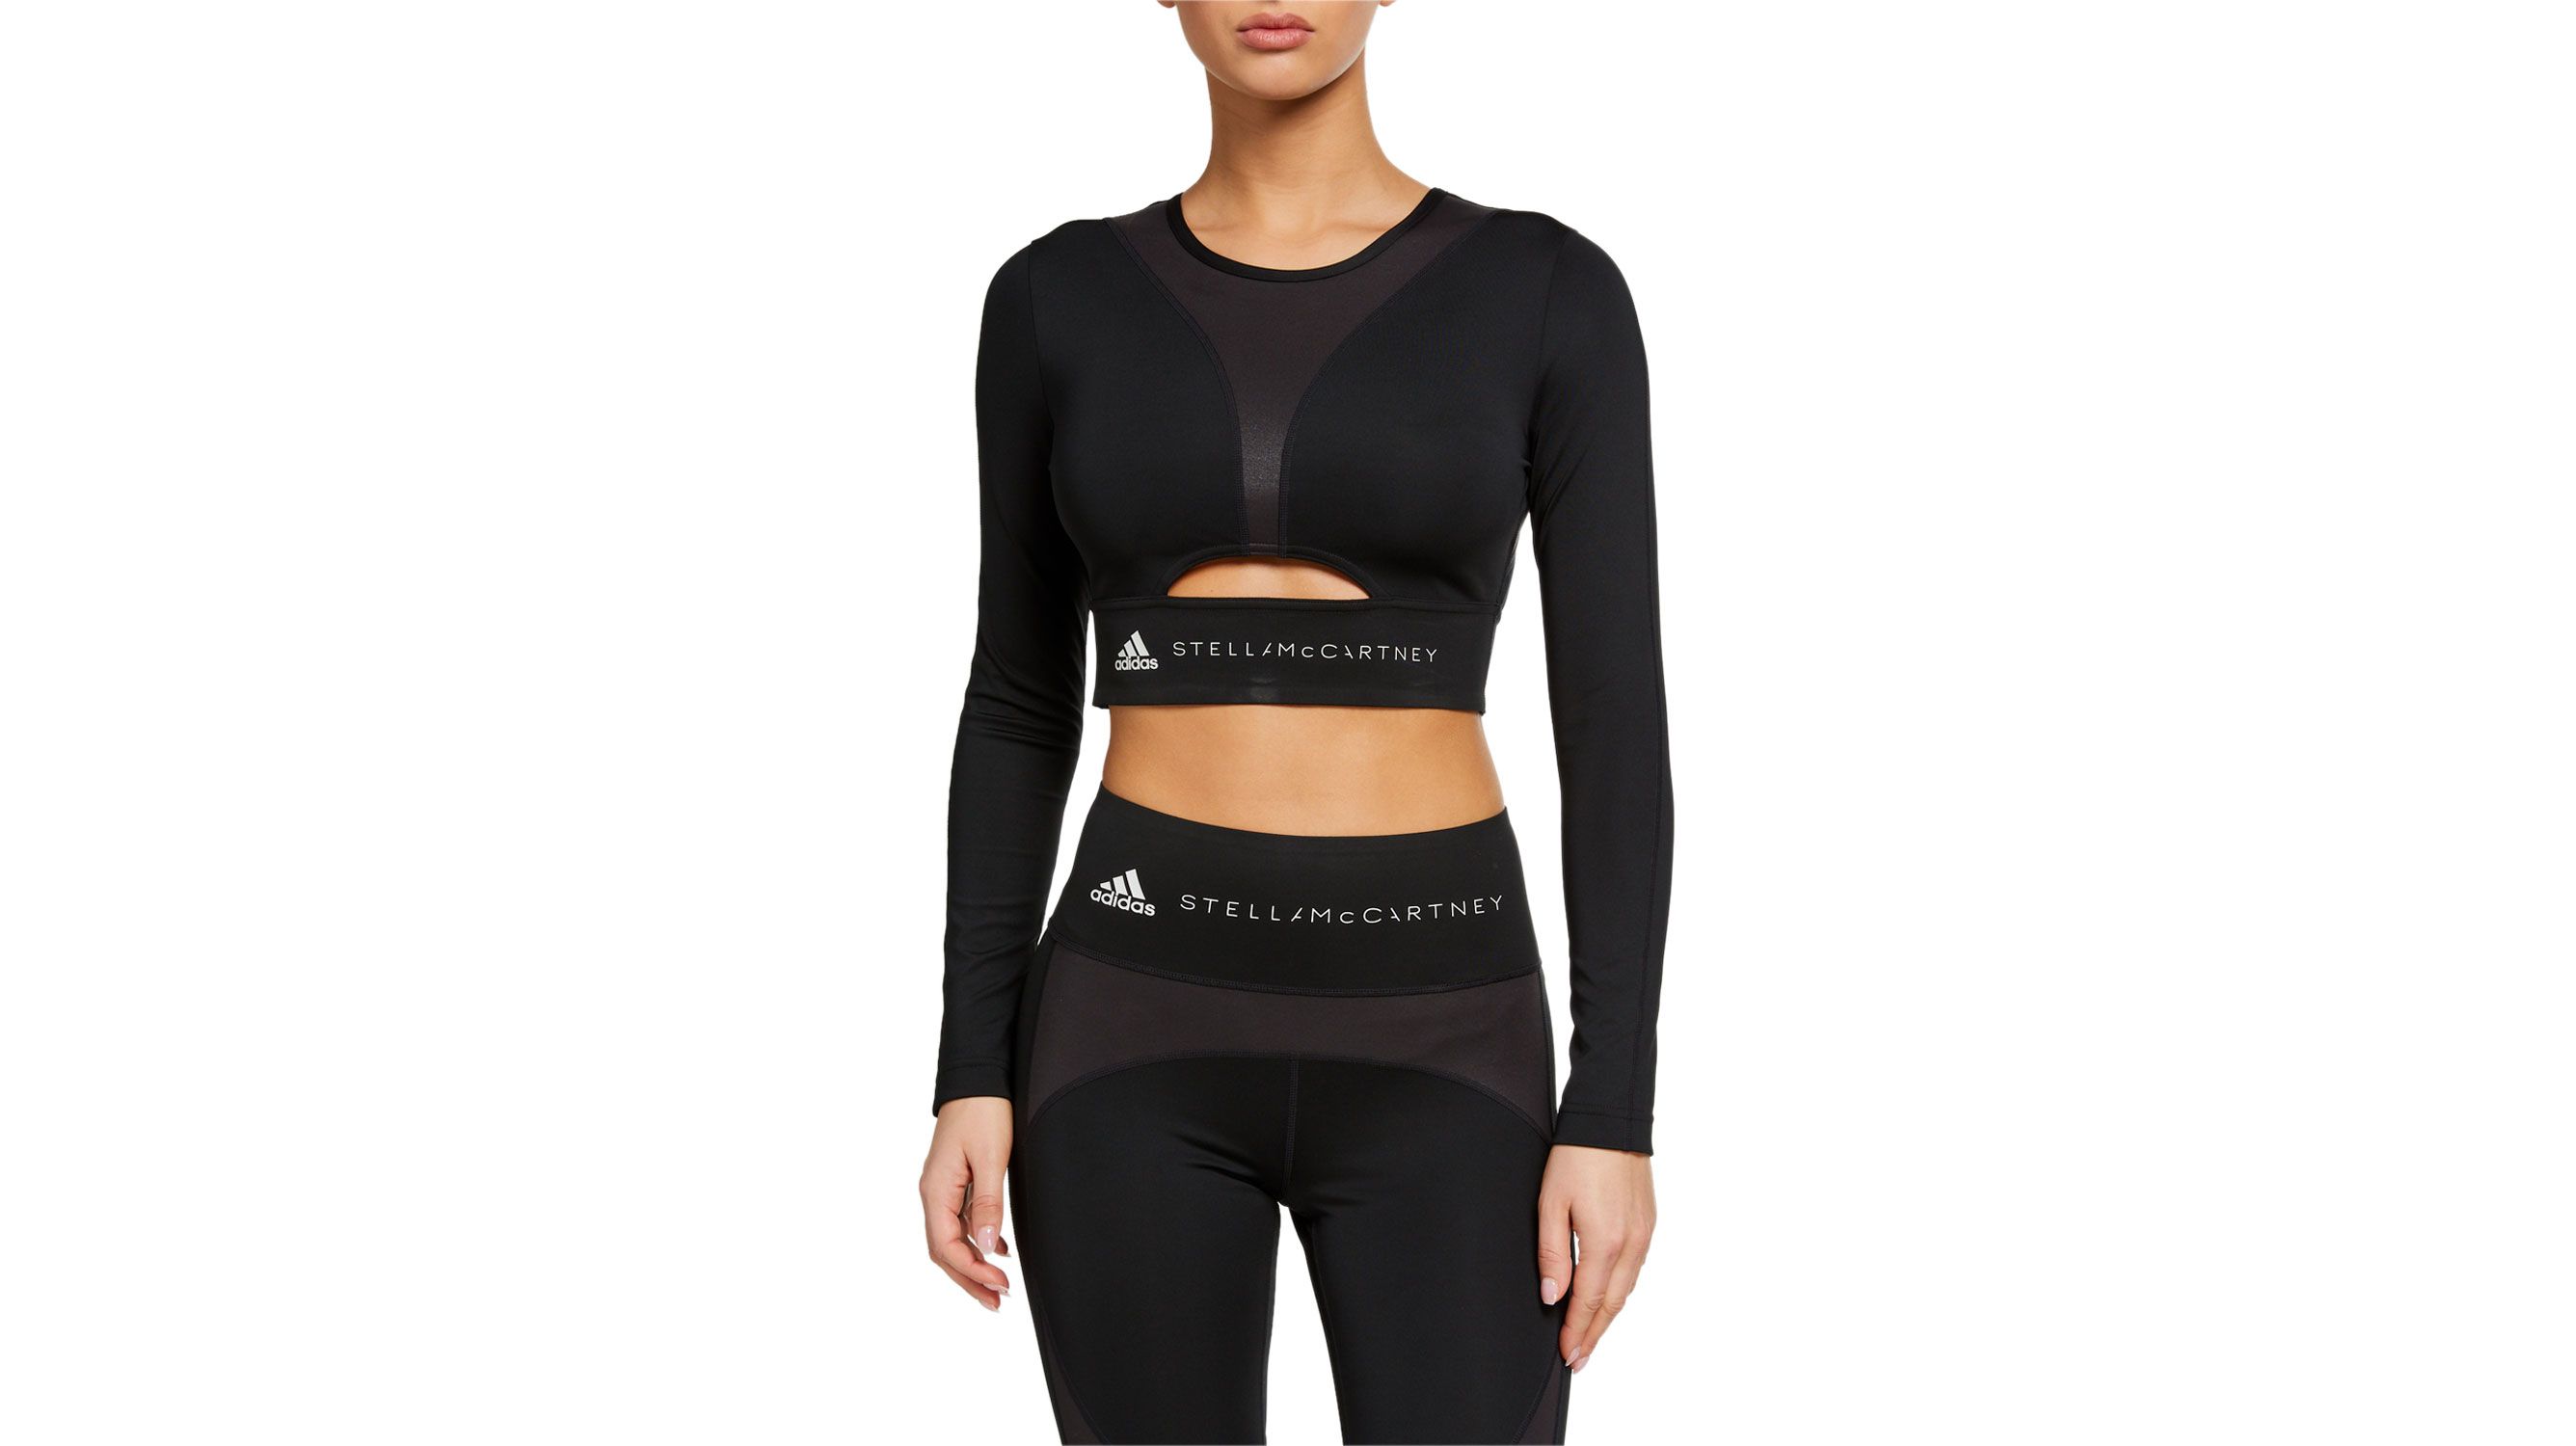  SUNMU 2 Piece Set Workout Clothes for Women Sports Bra and Leggings  Set Sports Wear for Women Gym Clothing Athletic Yoga Set : Clothing, Shoes  & Jewelry